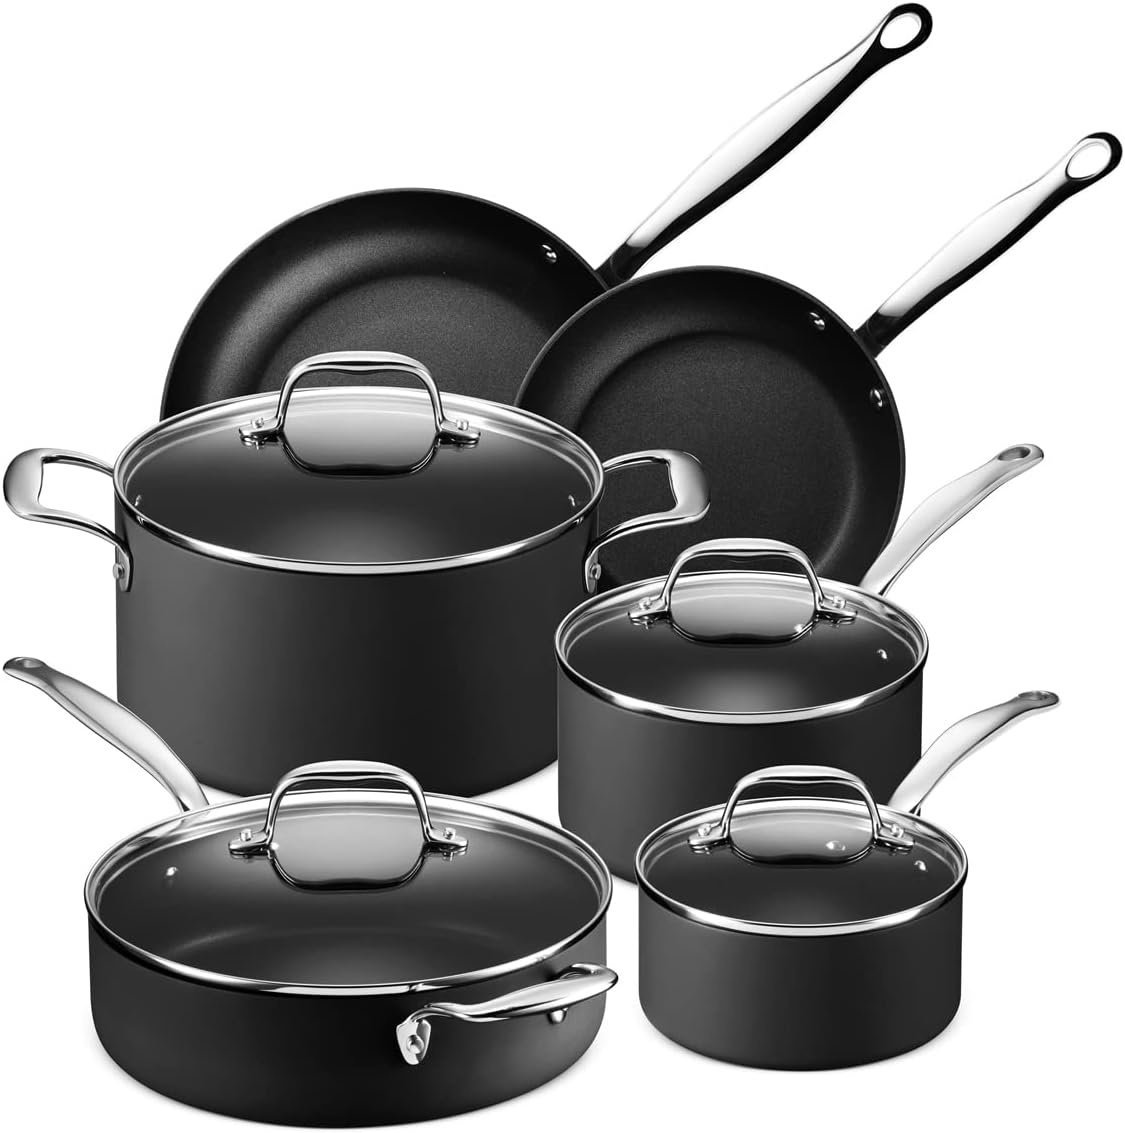 Legend 10 pc Nonstick Cookware Set | Classic Hard Anodized Steel Home Kitchen Chef Grade Pots and Pans | Durable PFOA Free, Non-Toxic Non Stick Coating Induction Cooking | Oven  Dishwasher Safe